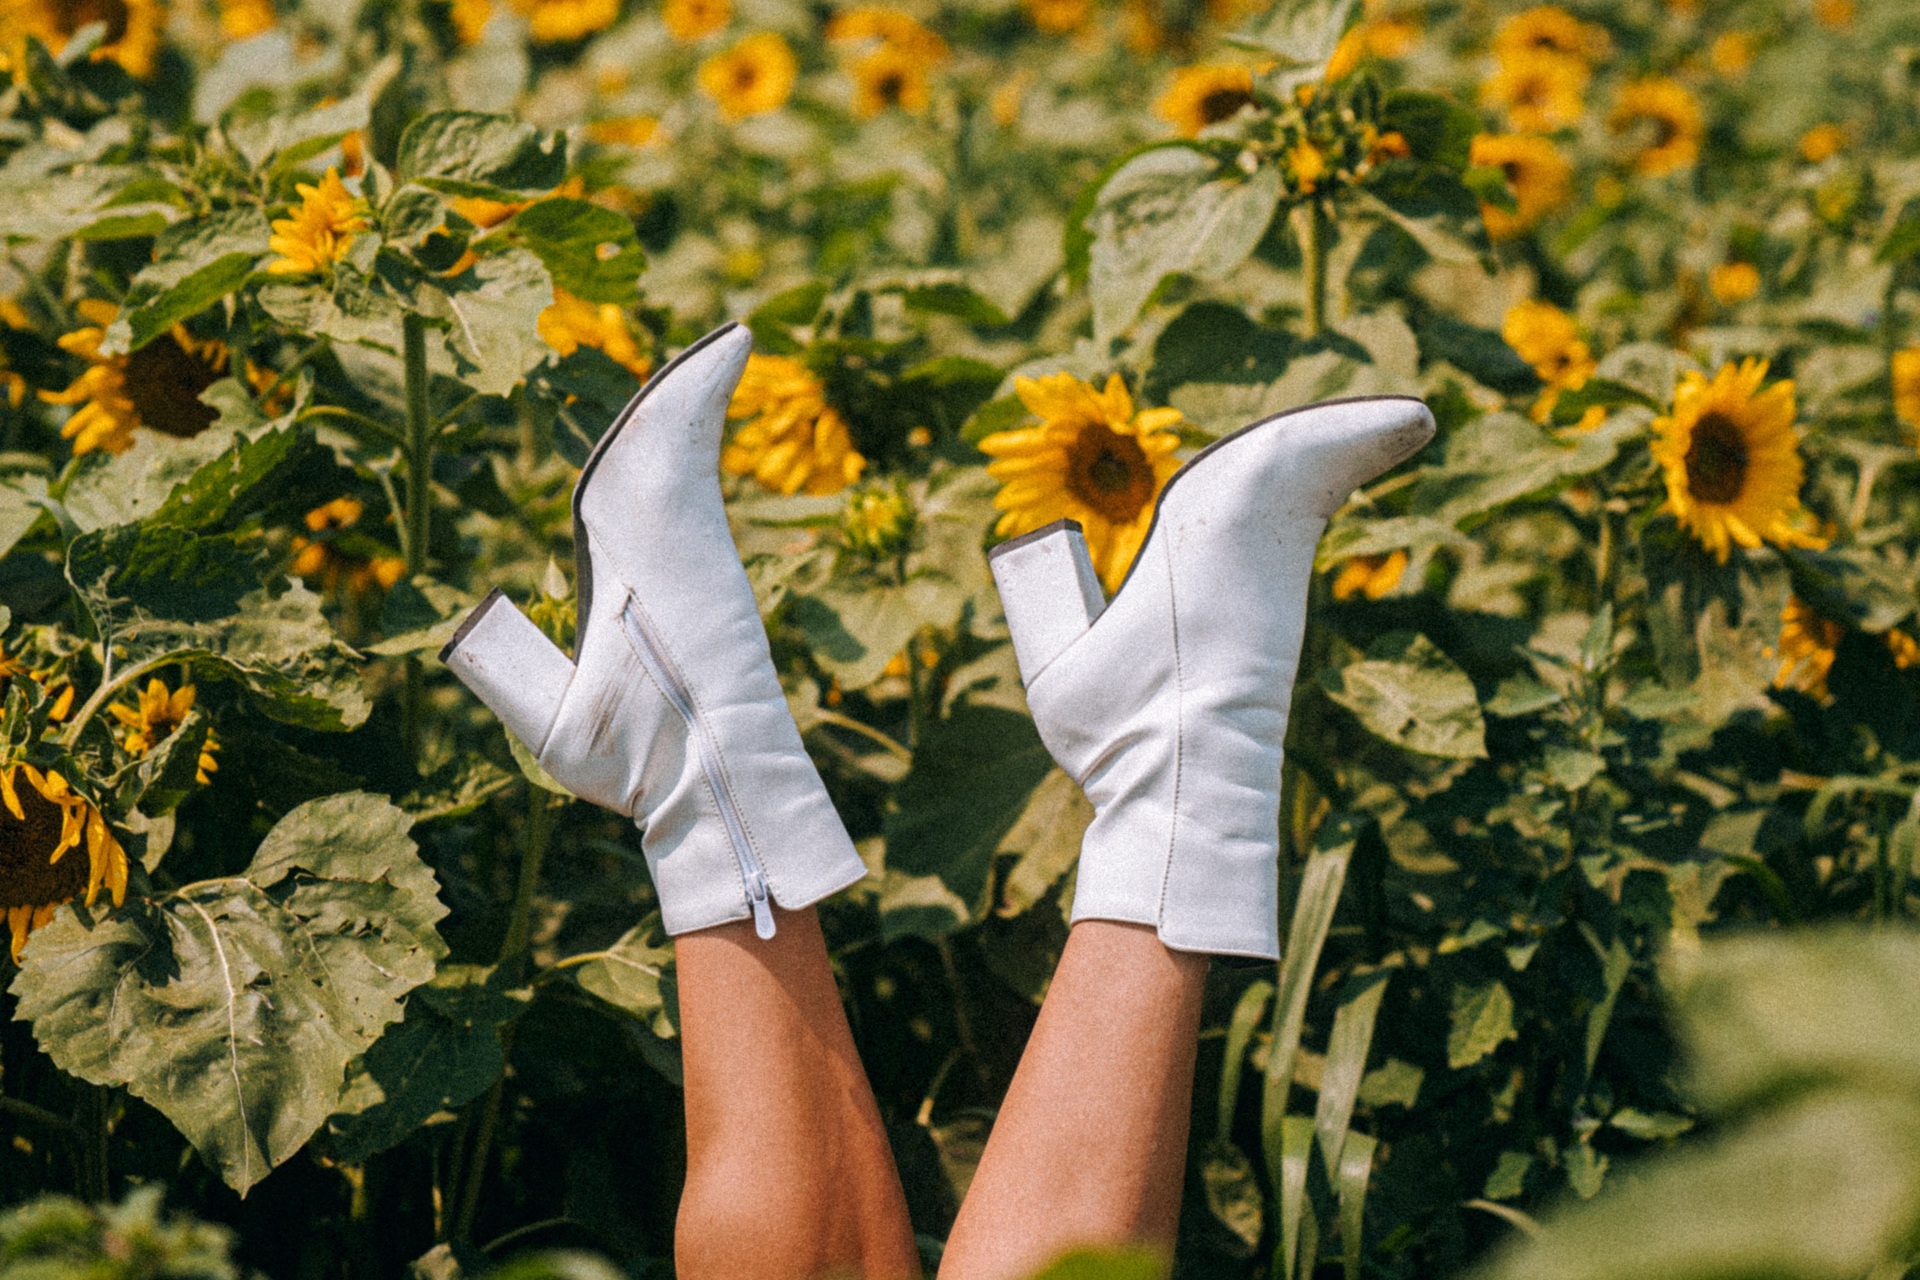 Legs in the air wearing white boots, in sunflower field